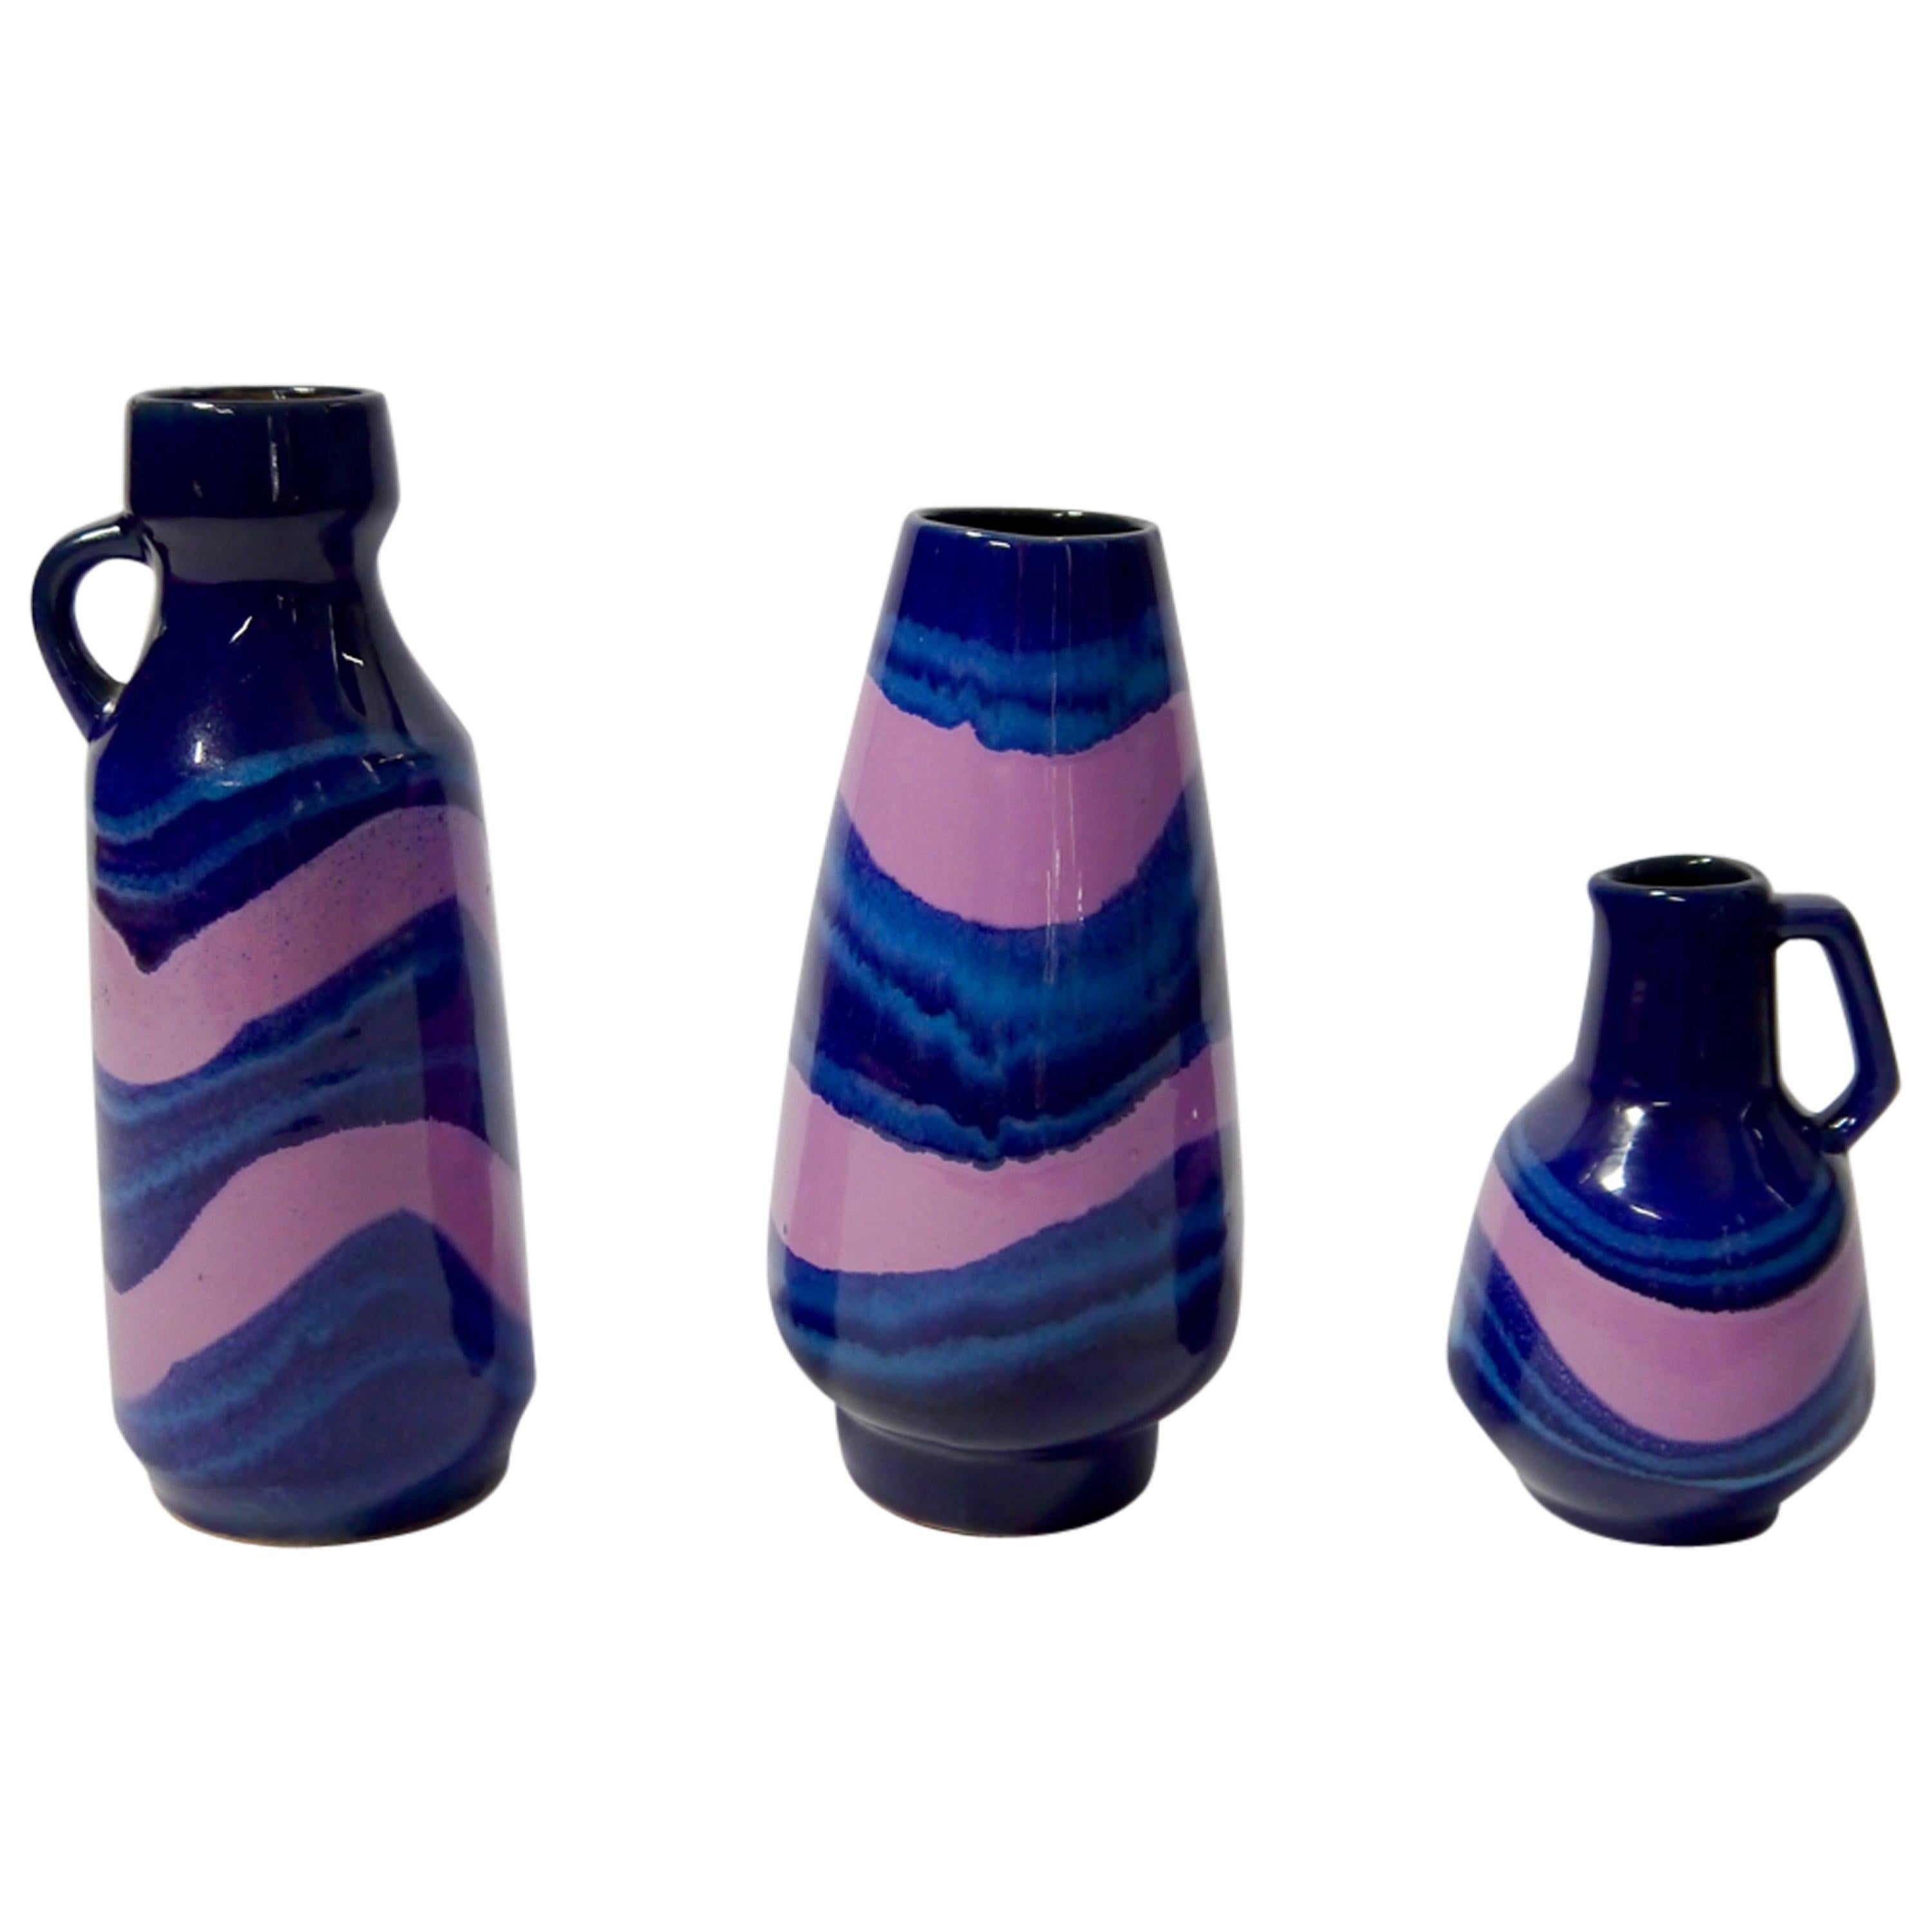 Set of Blue and Soft Pink Ceramic Vases by Strehla, East Germany, 1970s For Sale